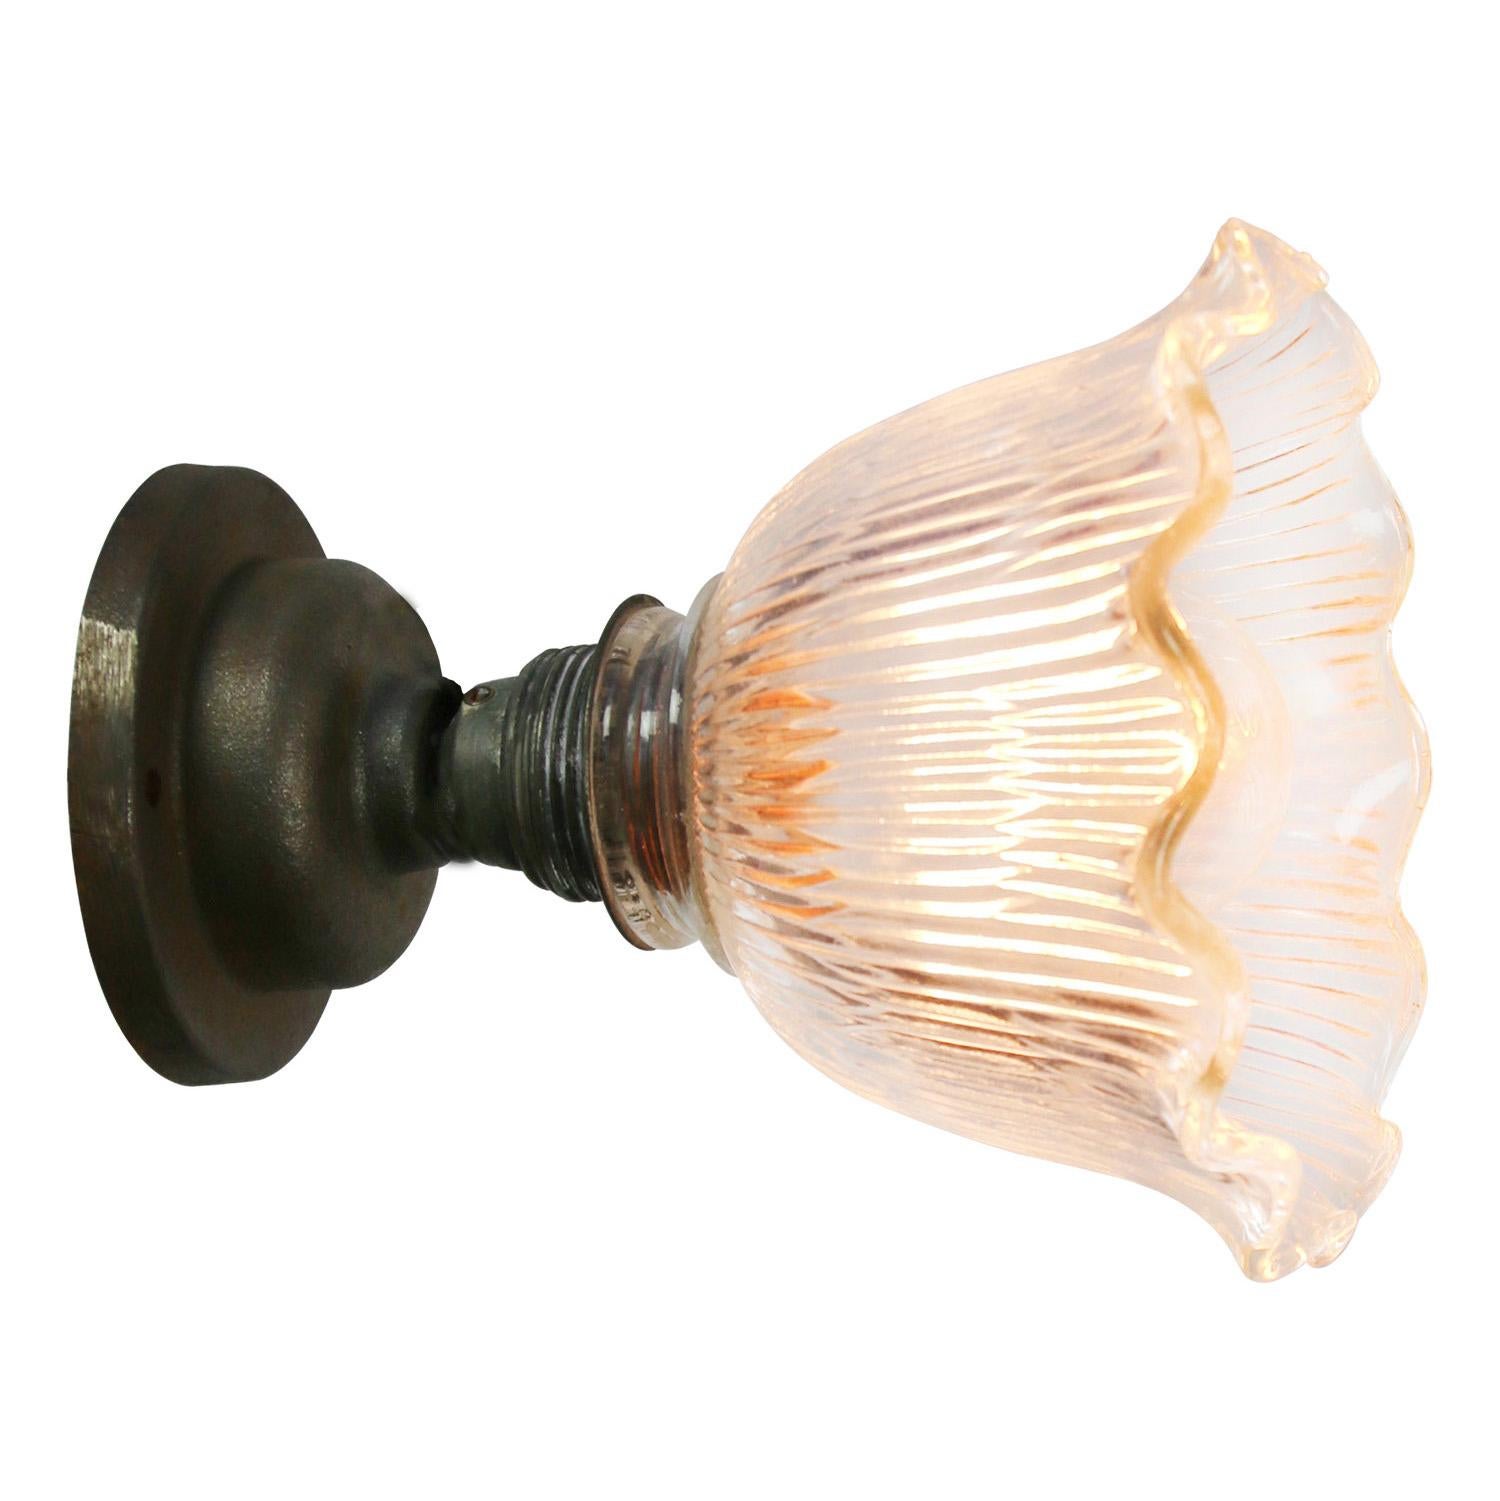 Holophane glass wall light
metal E27 bulb holder with clear striped glass shade
cast iron wall mount diameter 10 cm
wall lamp or ceiling scone

Weight: 1.40 kg / 3.1 lb

Priced per individual item. All lamps have been made suitable by